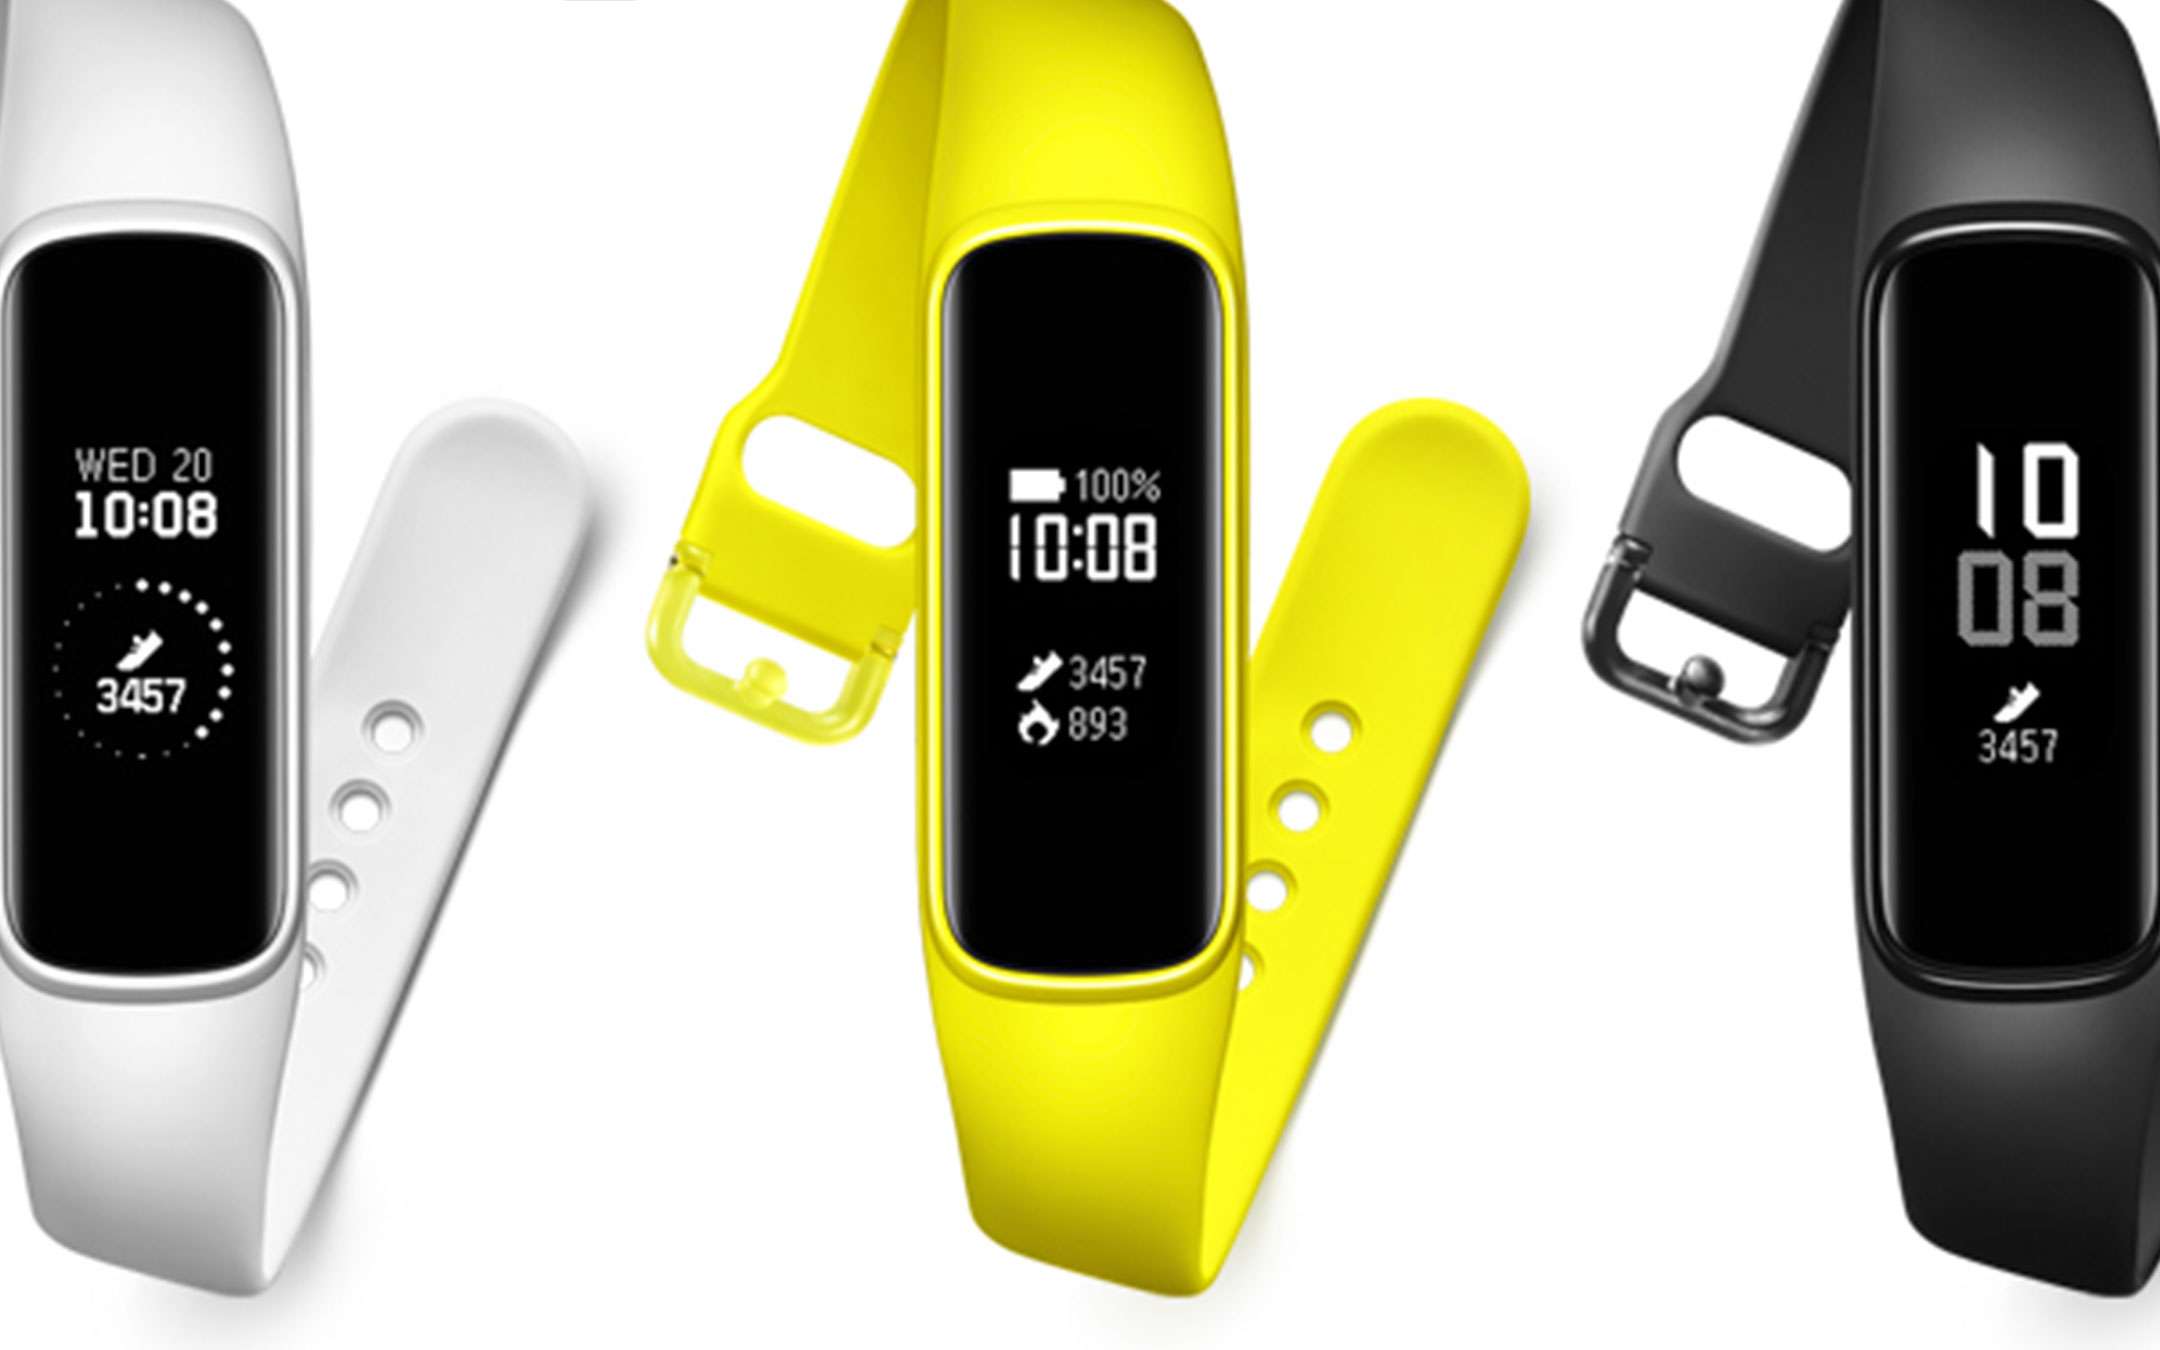 Гелакси фит. Samsung Galaxy Fit 1. Samsung Galaxy Fit SM-r370. Samsung Band Fit. Samsung Fit e.